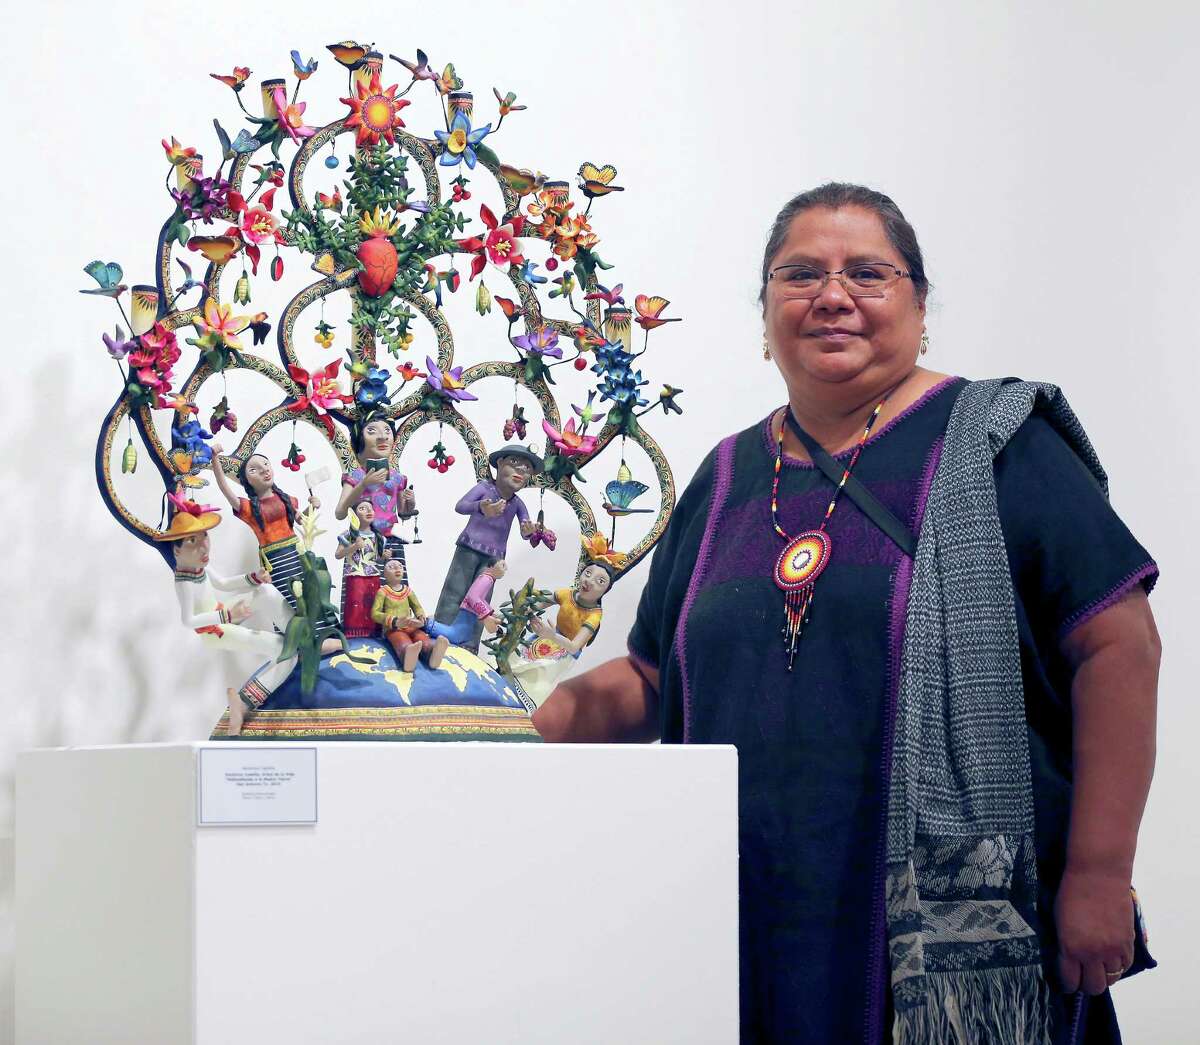 Veronica Castillo, a folk artist who was awarded an NEA National Heritage Fellowship in 2013 poses Oct. 6, 2015 next to one of her sculptures on display at the TAMU-SA Centro de Artes.